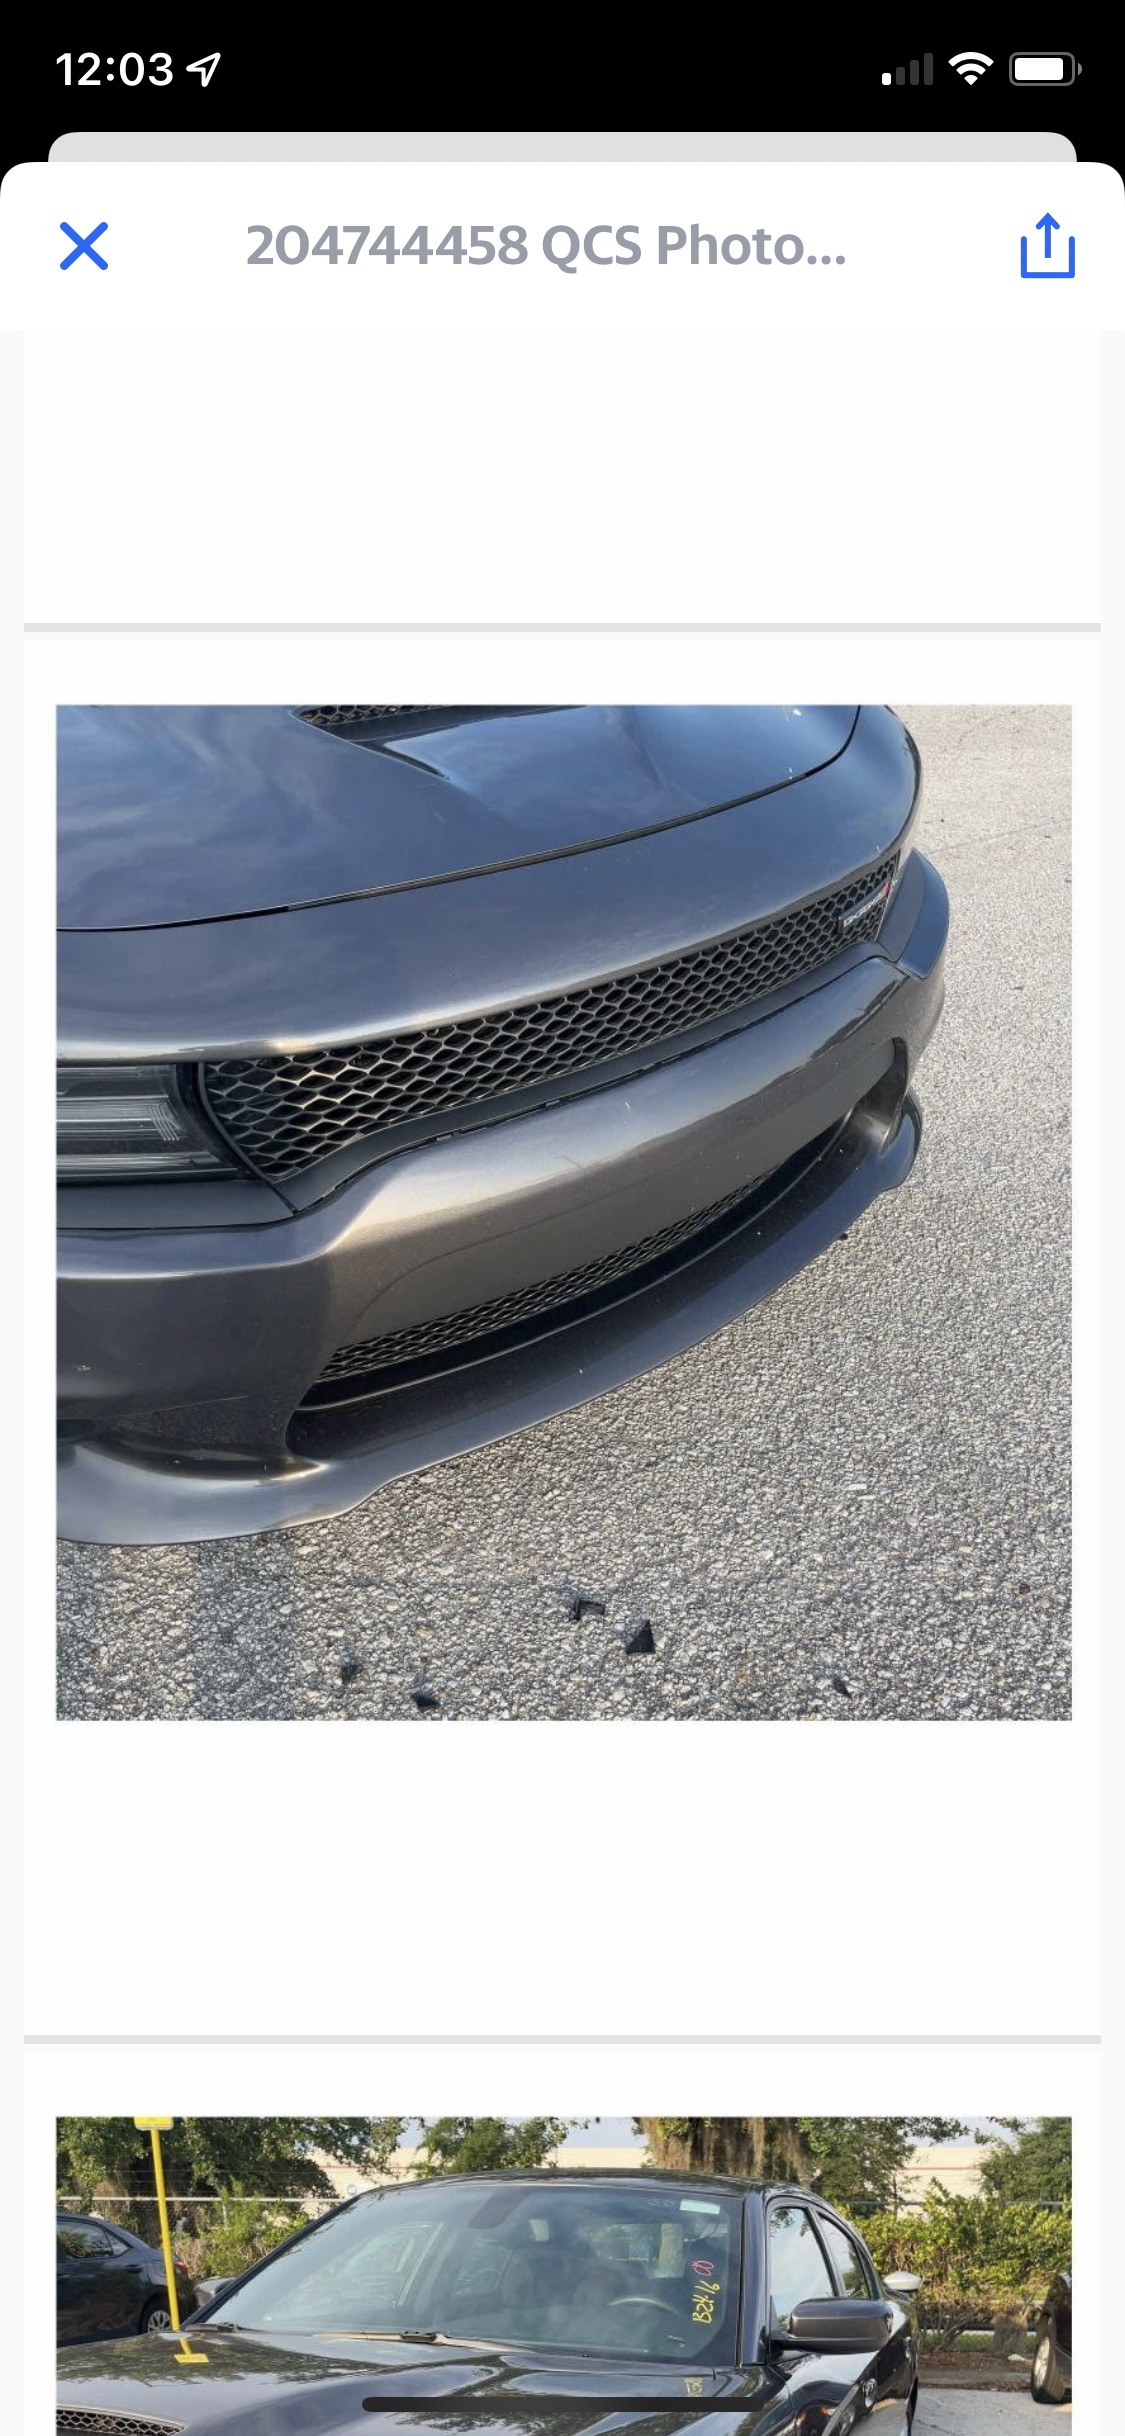 Pictures Hertz sent saying bumper and hood damages